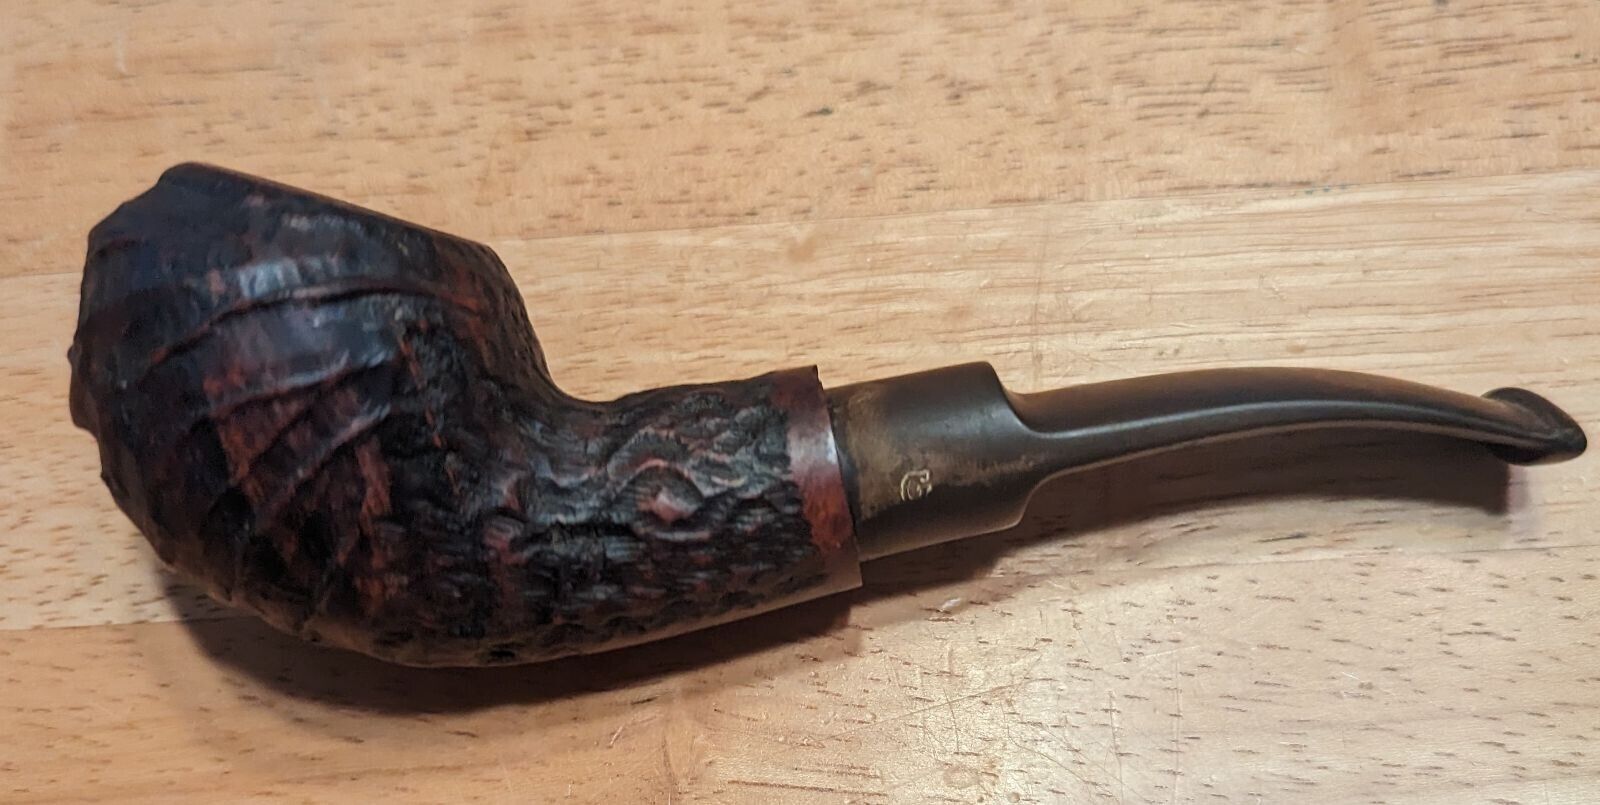 GBD CONCORDE 9438 Vintage Tobacco Smoking Pipe RARE OLD tin cleaner